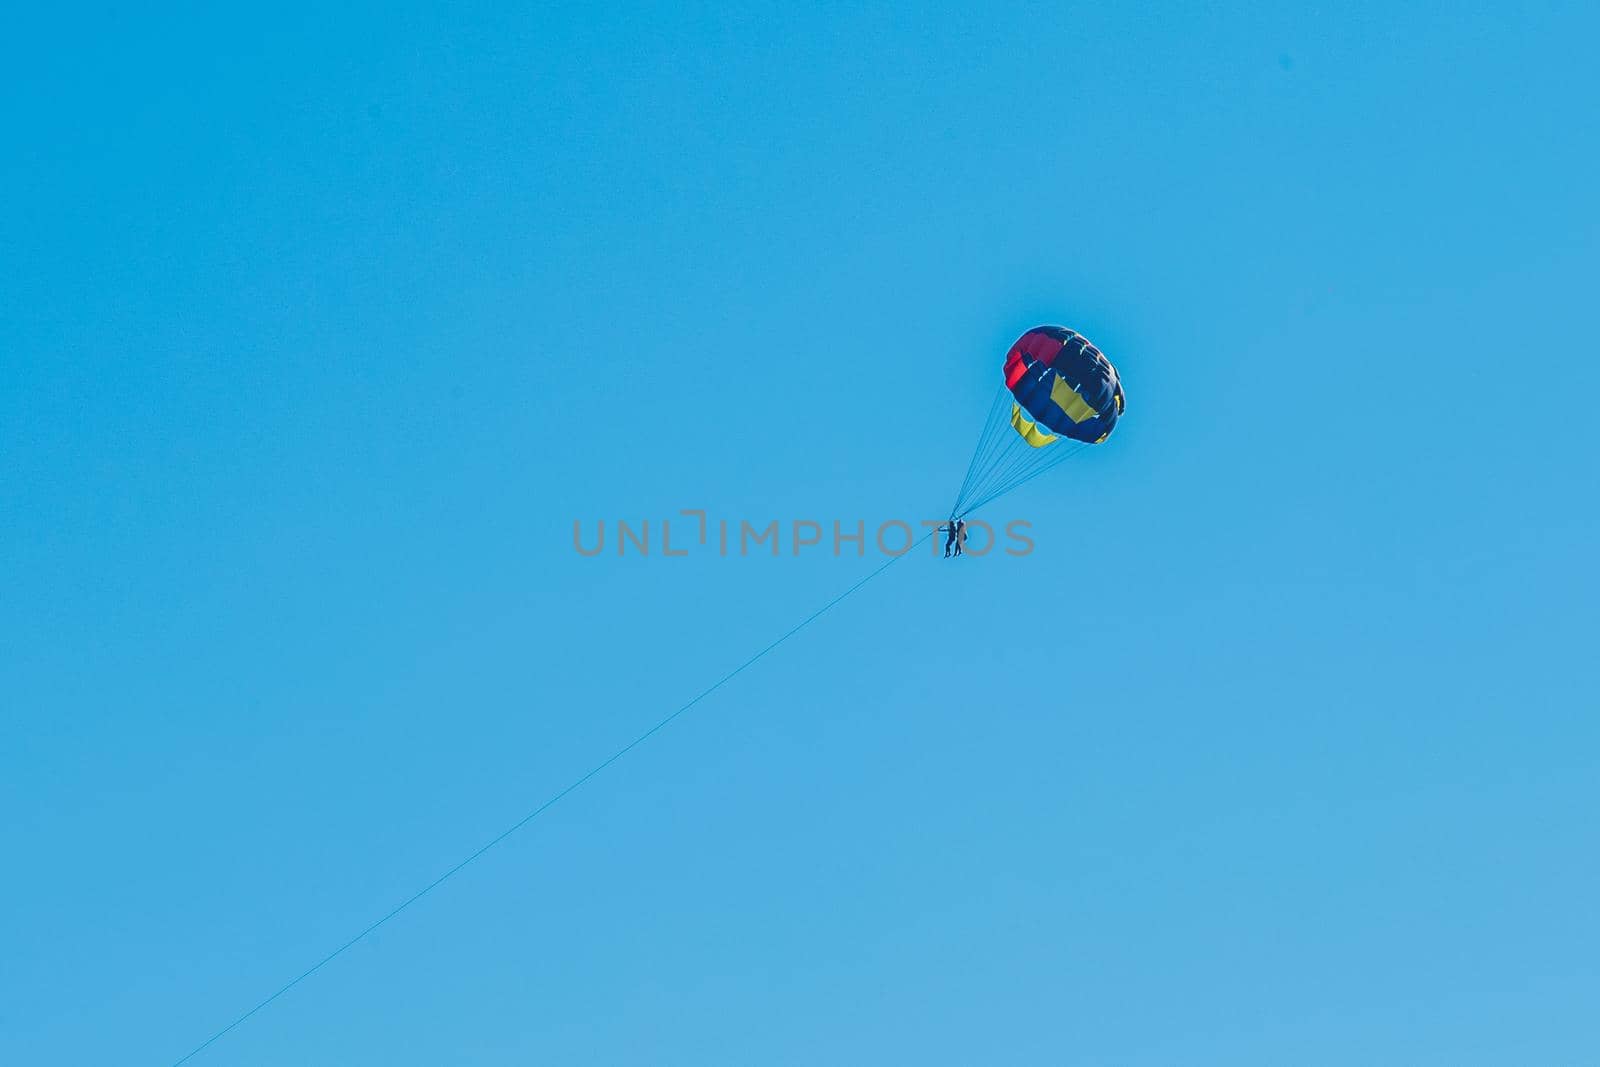 Extreme sports and exciting rest. Tourist fly on a parashute in the blue sky background.